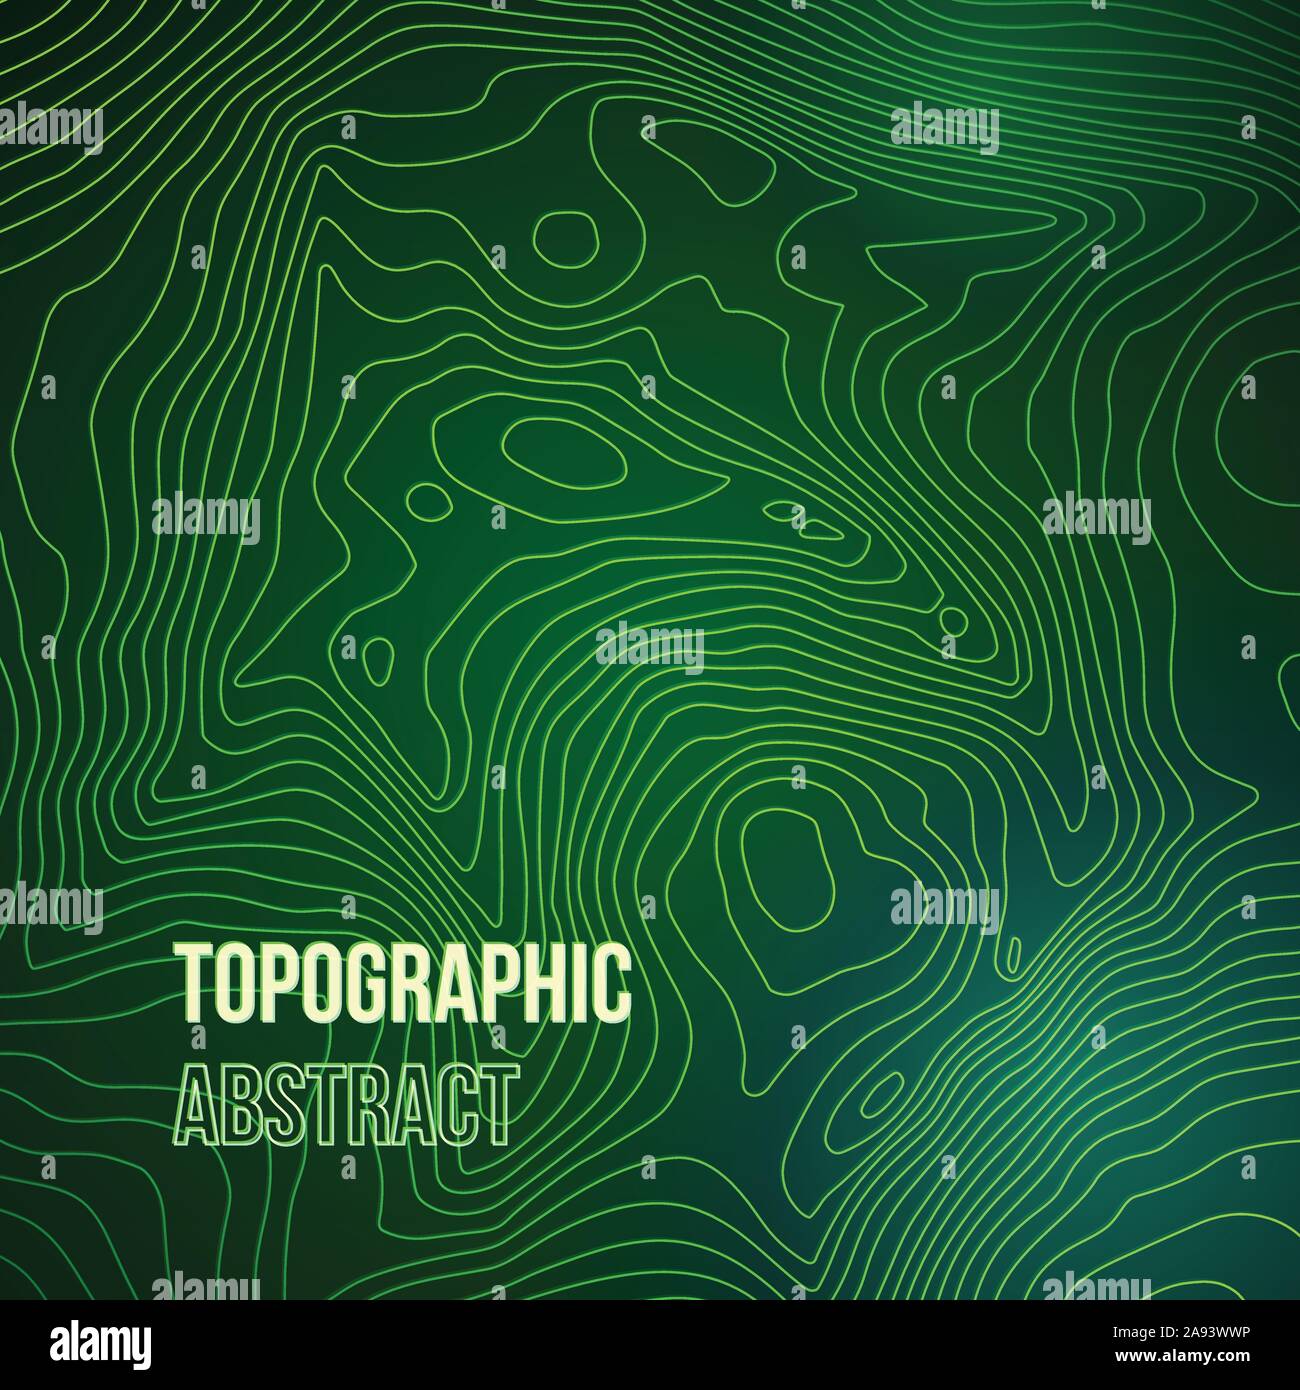 Topographic map colorful abstract background with contour lines Stock Vector